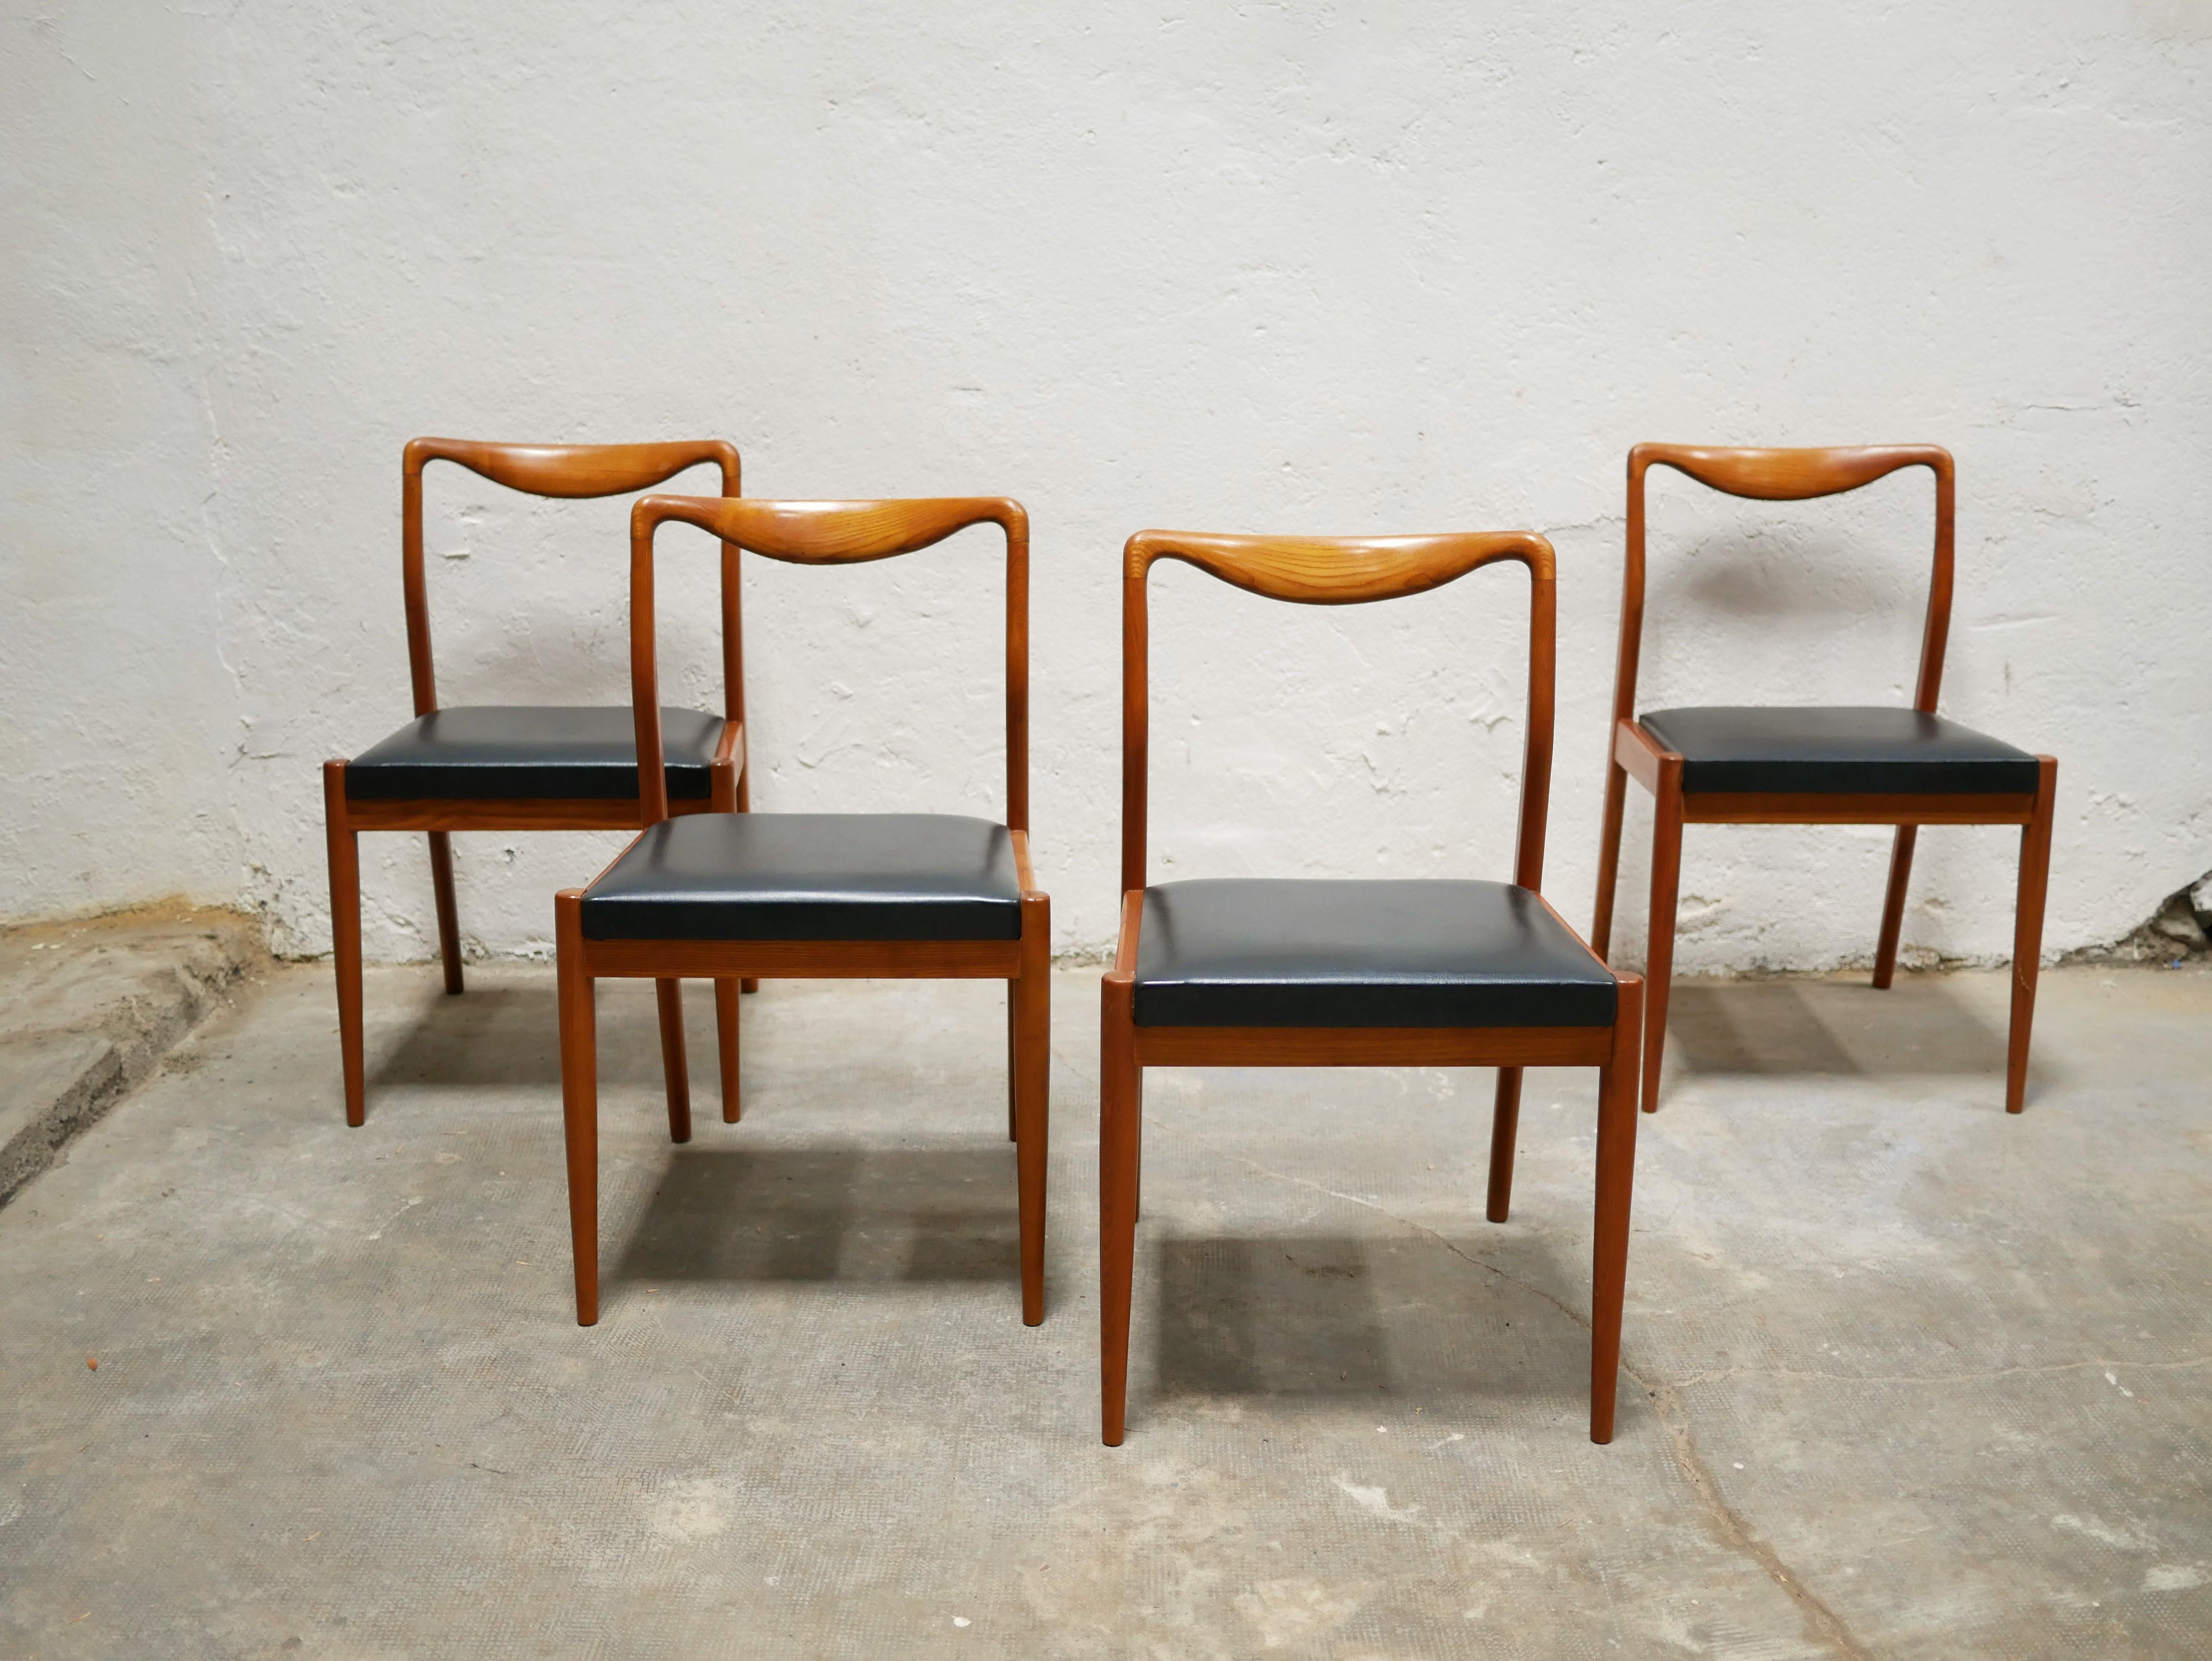 Series of 4 Vintage Scandinavian Chairs in Teak and Leatherette For Sale 5